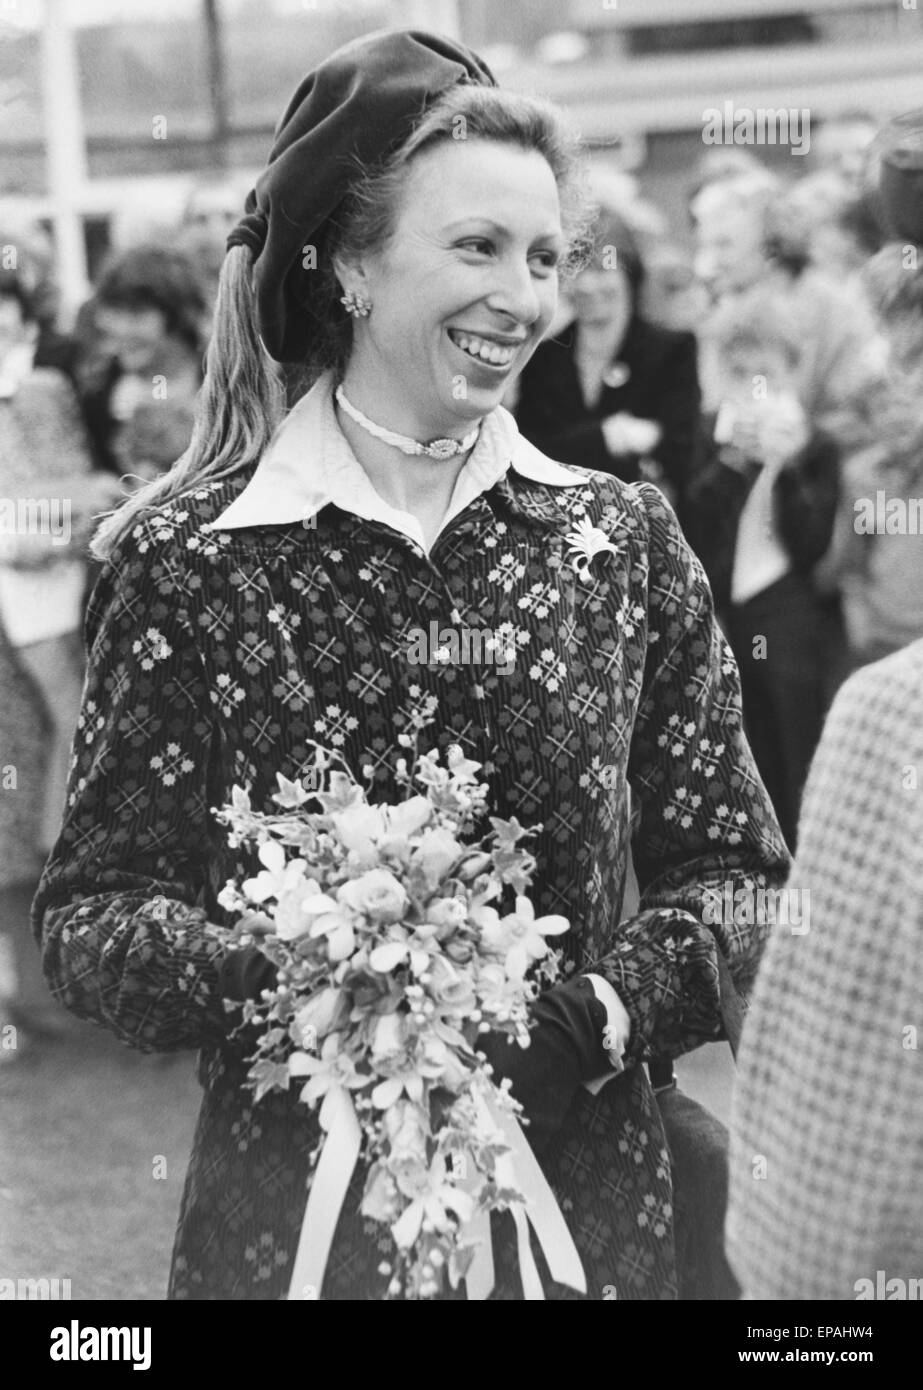 princess-anne-with-flowers-on-walkabout-c1979-EPAHW4.jpg